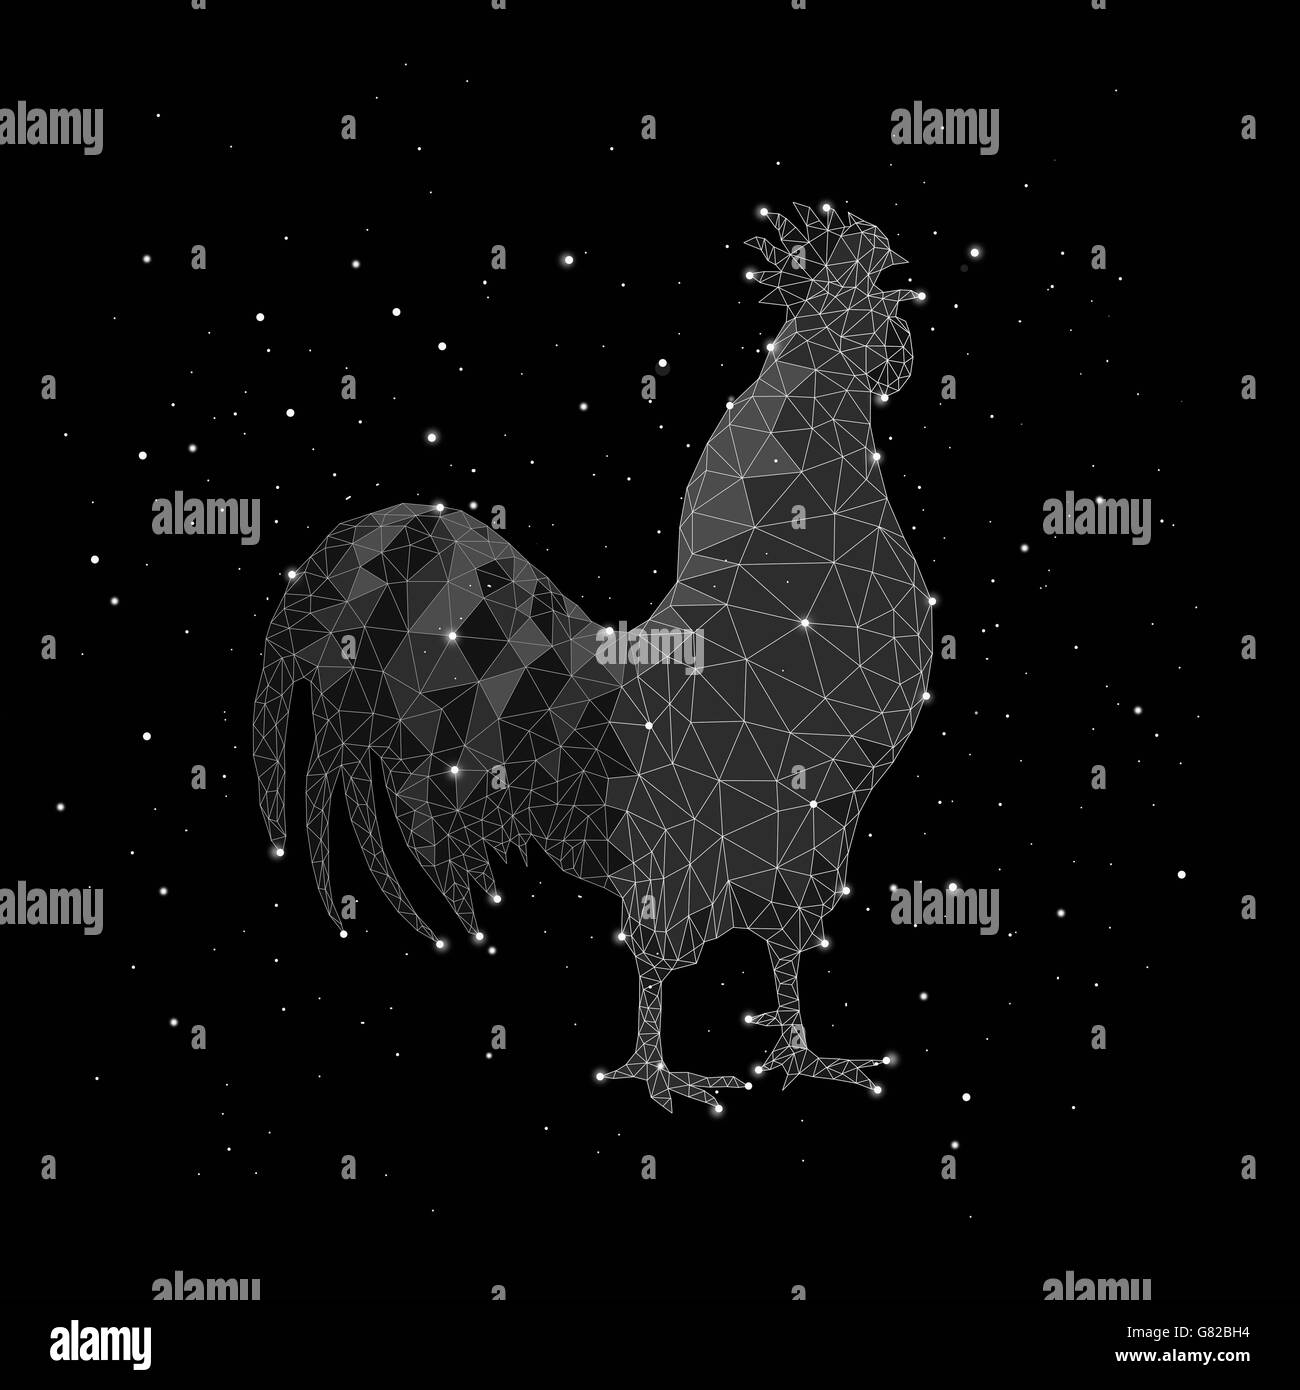 Composite image of constellation forming rooster against black background Stock Photo